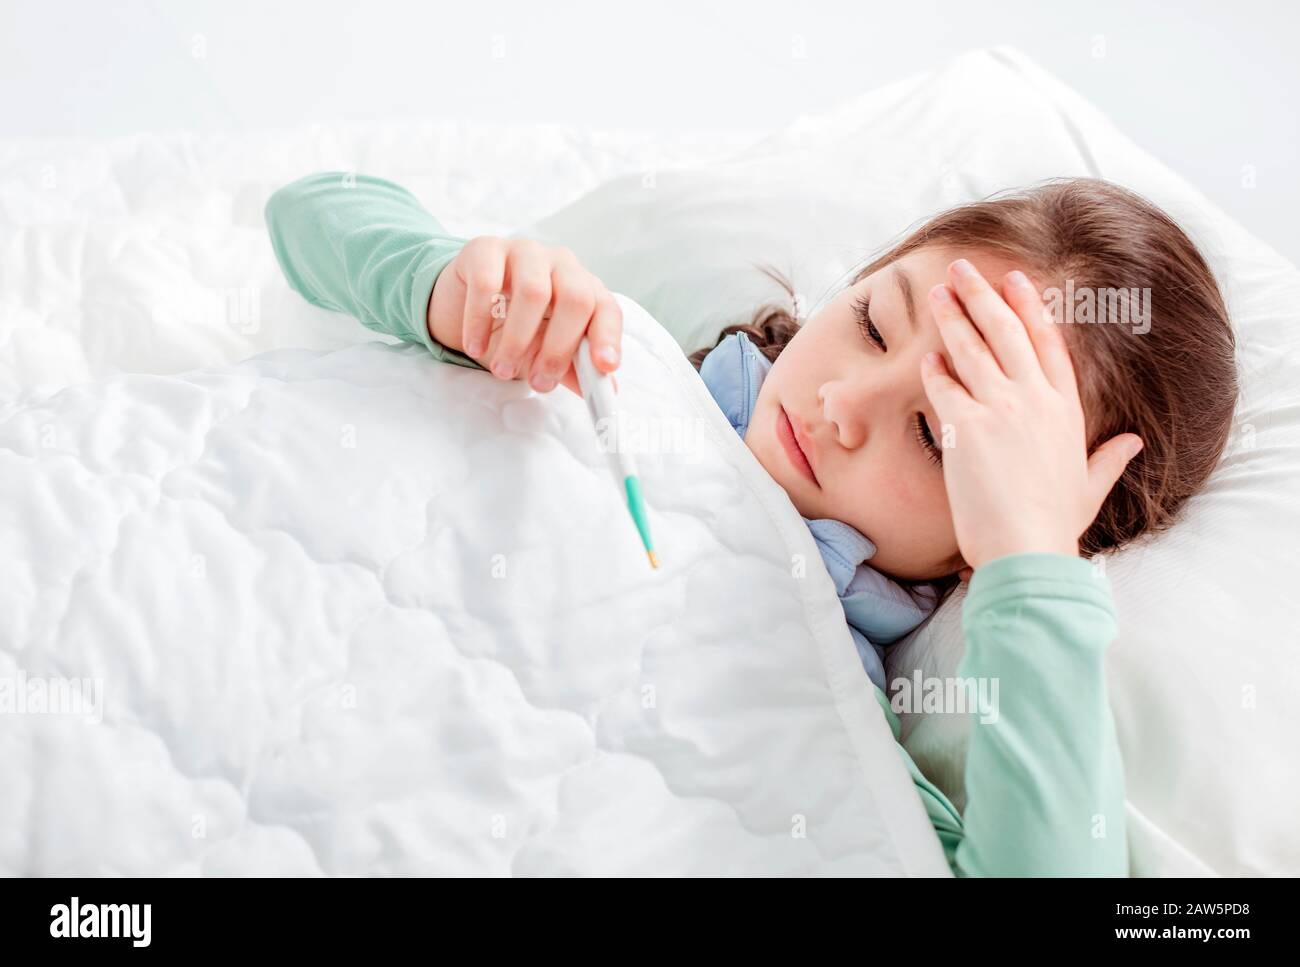 Sick child with flu fever laying in bed and  holding thermometer Stock Photo